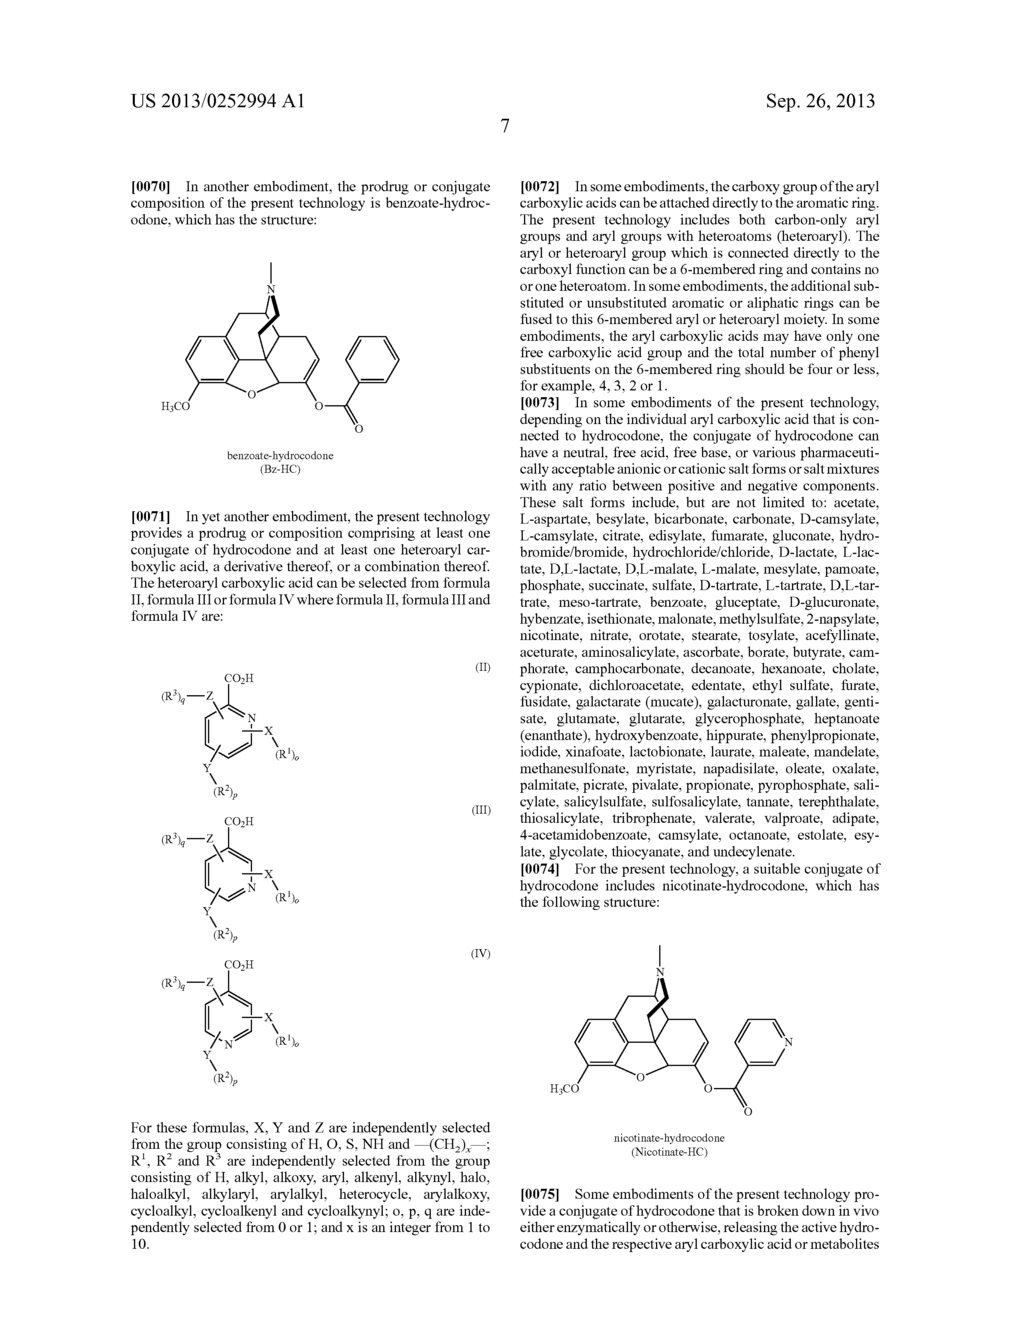 Benzoic Acid, Benzoic Acid Derivatives and Heteroaryl Carboxylic Acid     Conjugates of Hydrocodone, Prodrugs, Methods of Making and Use Thereof - diagram, schematic, and image 23